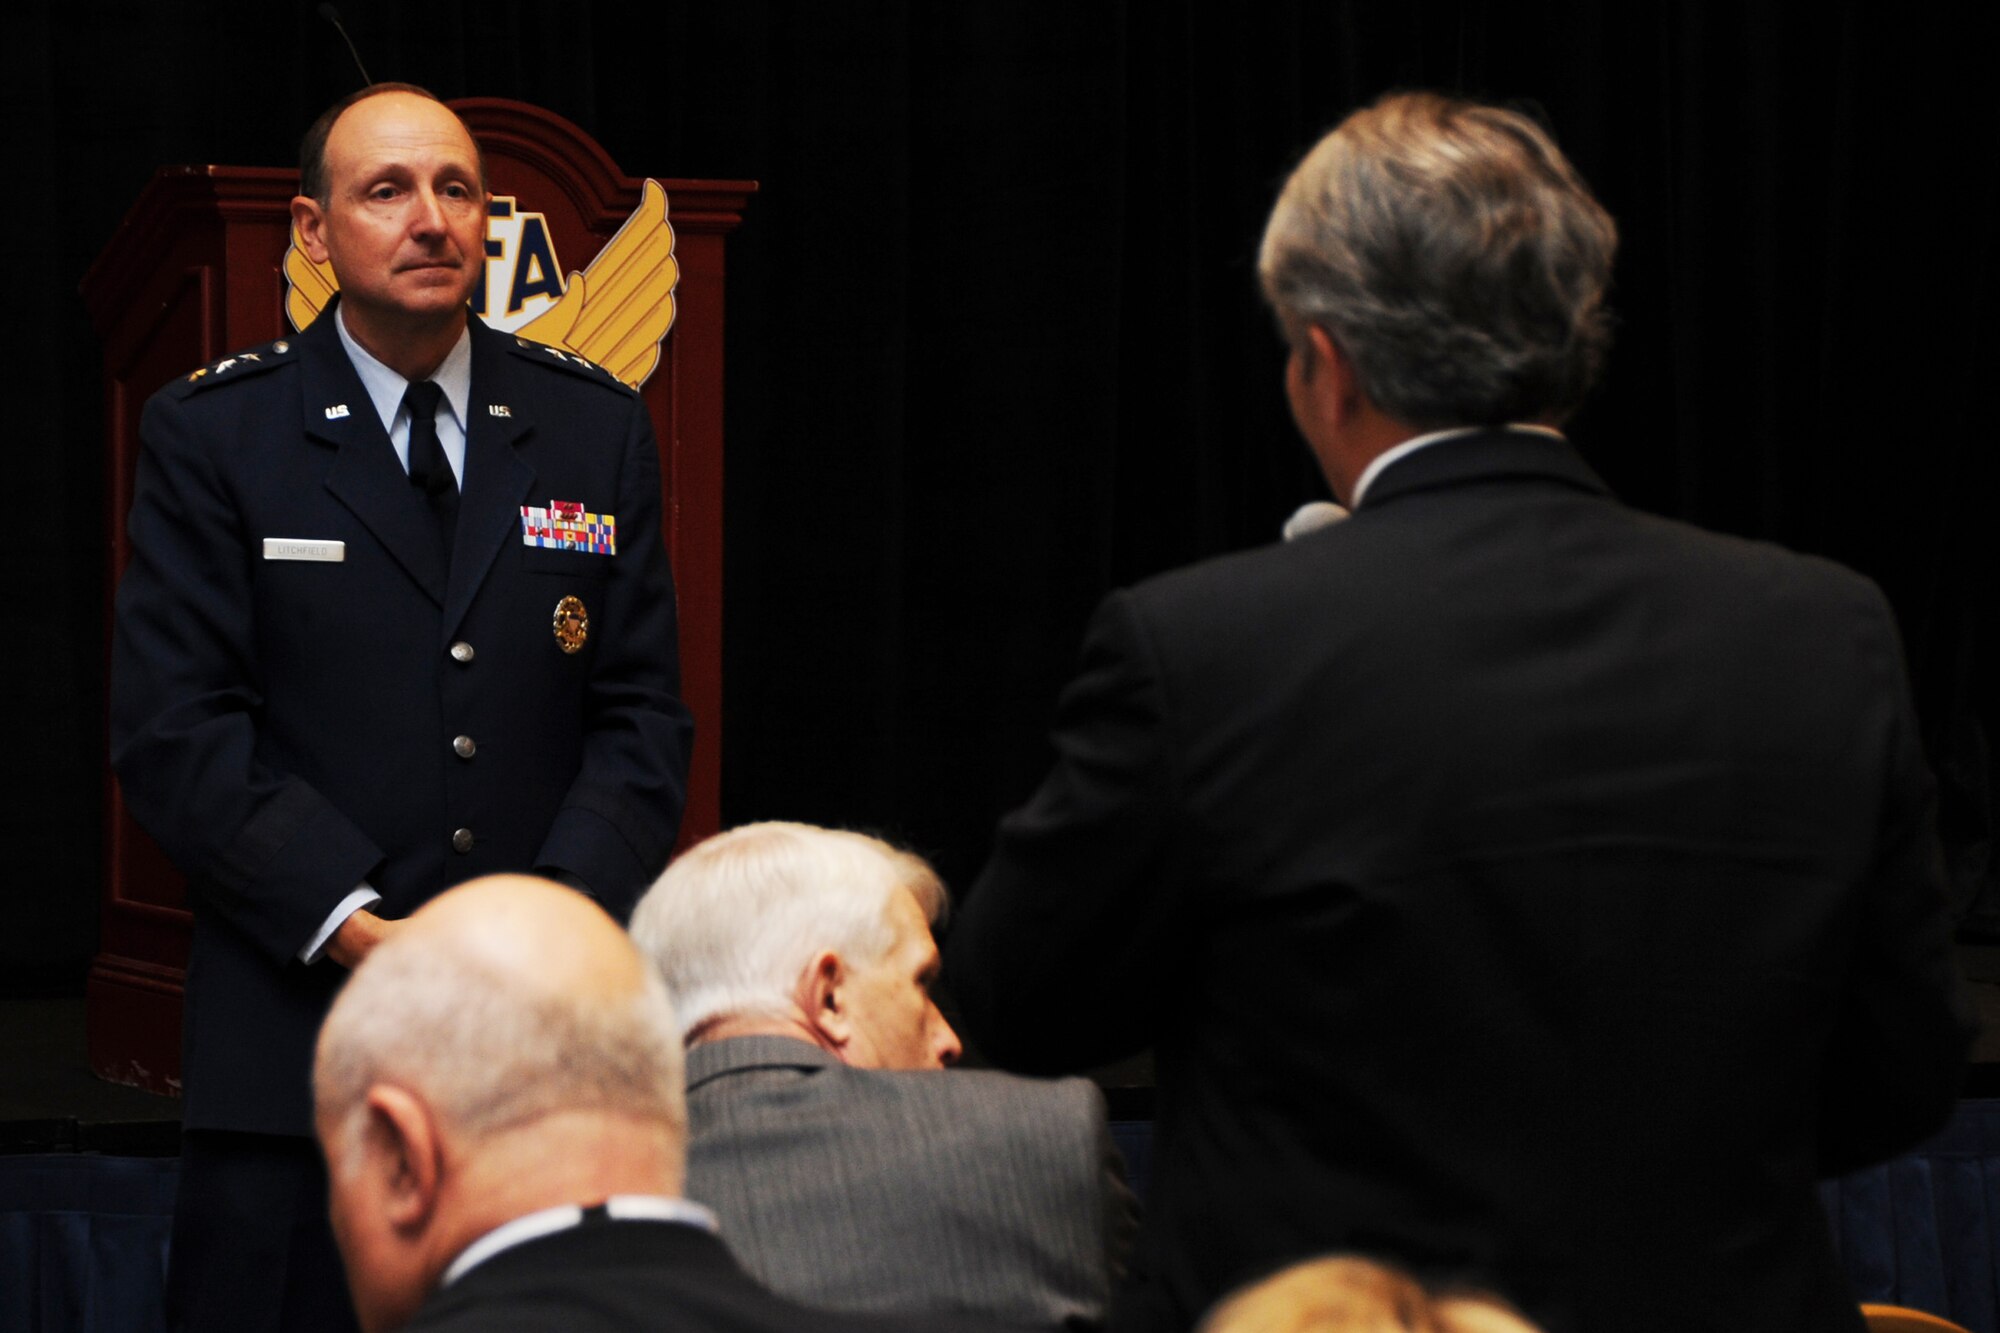 Lt. Gen. Bruce Litchfield takes a question from an audience member during the Air Force Association's 2014 Air and Space Conference Sept. 15, 2014 in Washington, D.C. As the Air Force Sustainment Center commander, he ensures the Center provides operational planning and execution of Air Force Supply Chain Management and Depot Maintenance for a wide range of aircraft, engines, missiles, and component items in support of Air Force Materiel Command missions. (U.S. Air Force photo/Staff Sgt. Matt Davis)